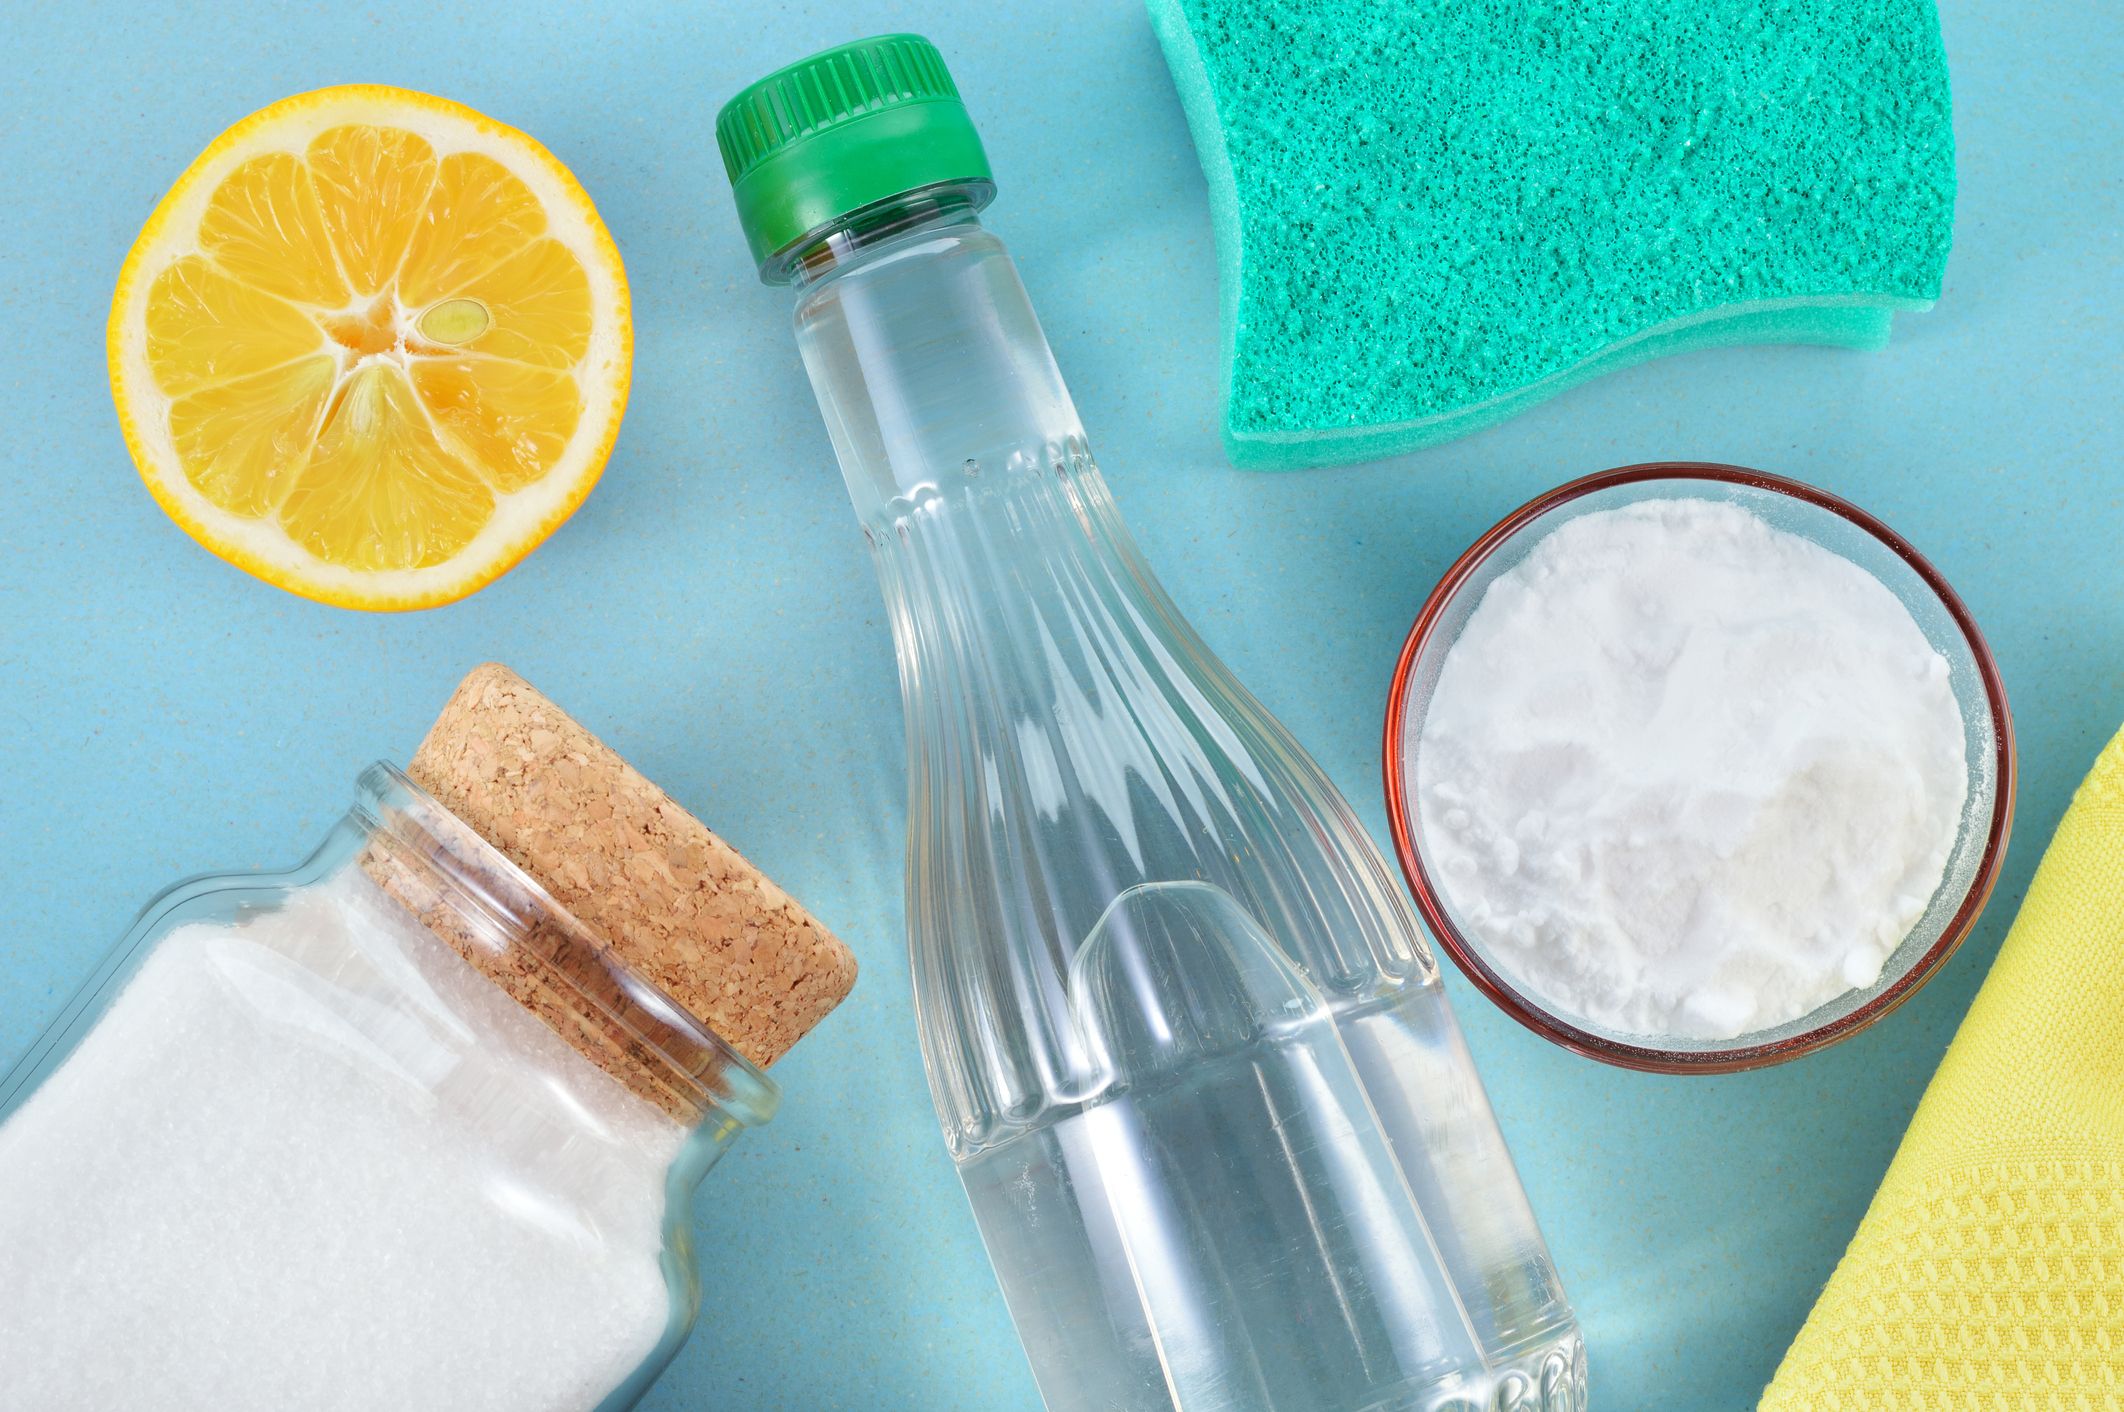 15 Homemade DIY Cleaners That Work - Natural Cleaning Products